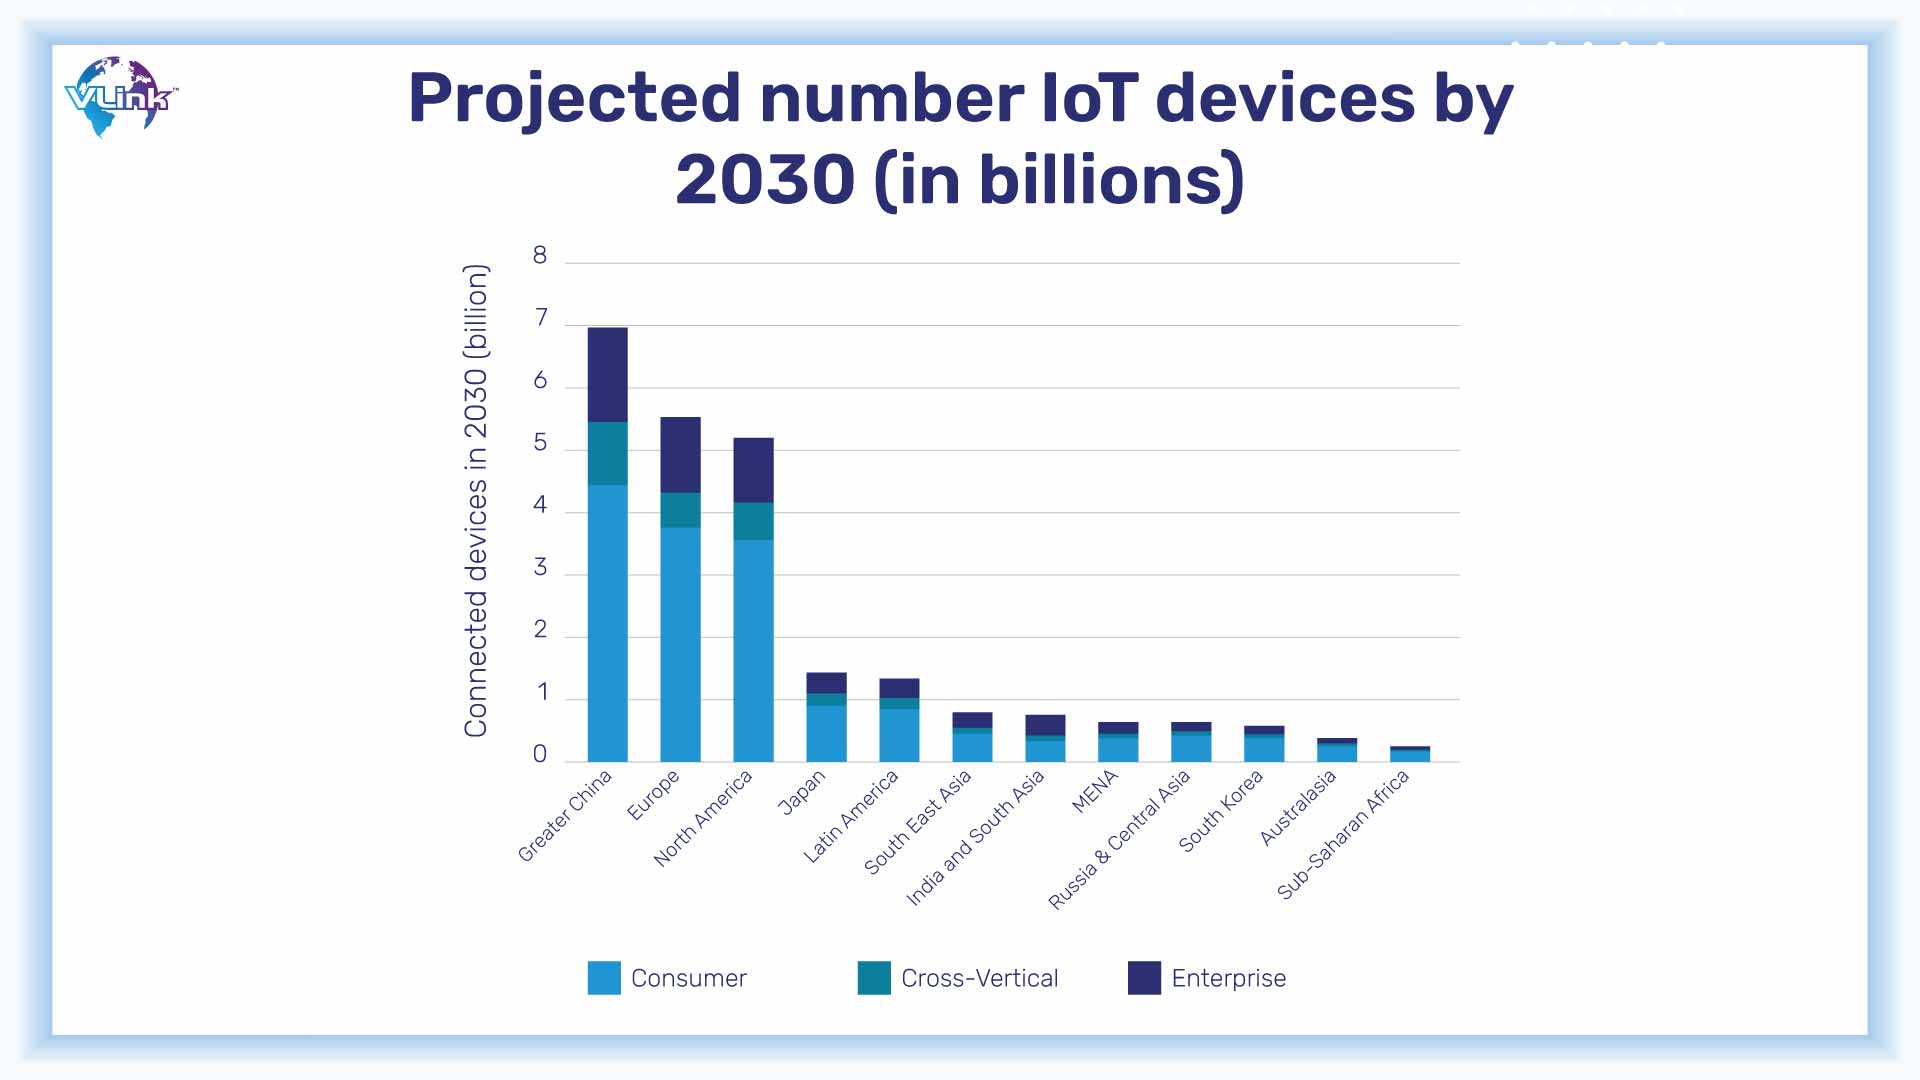 Projectednumber IOT devices by 2030